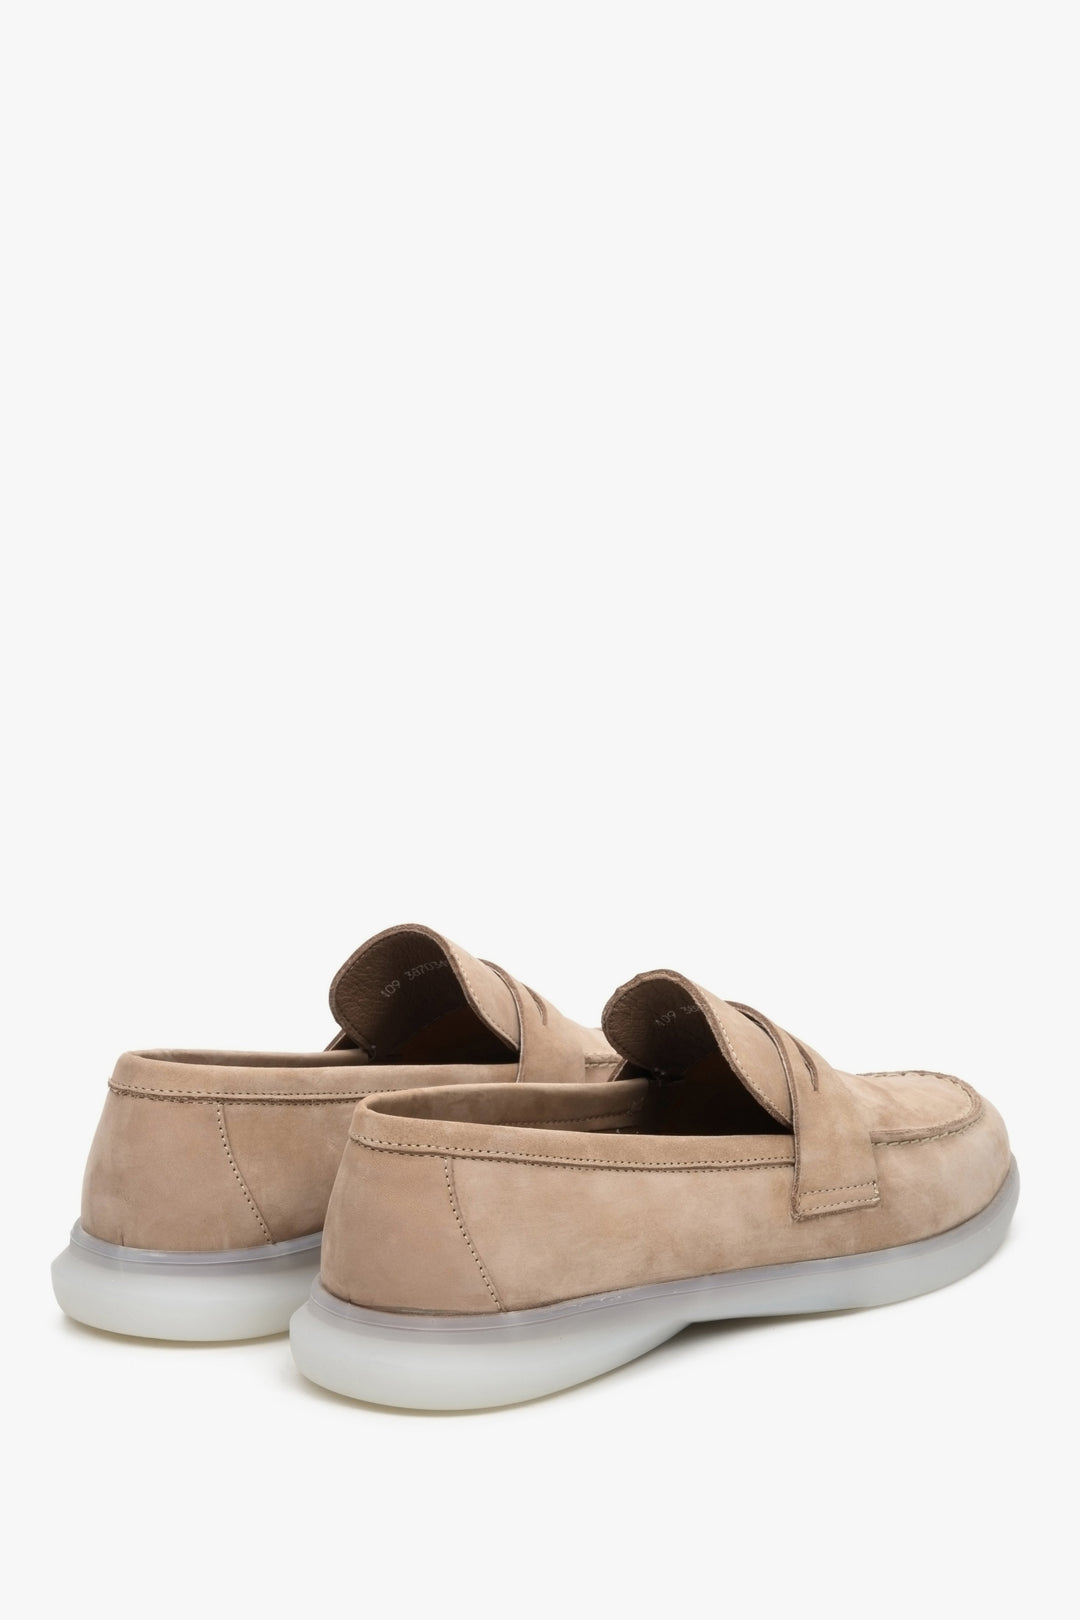 Men's nubuck leather moccasins by Estro - close-up on the heel and side seam.